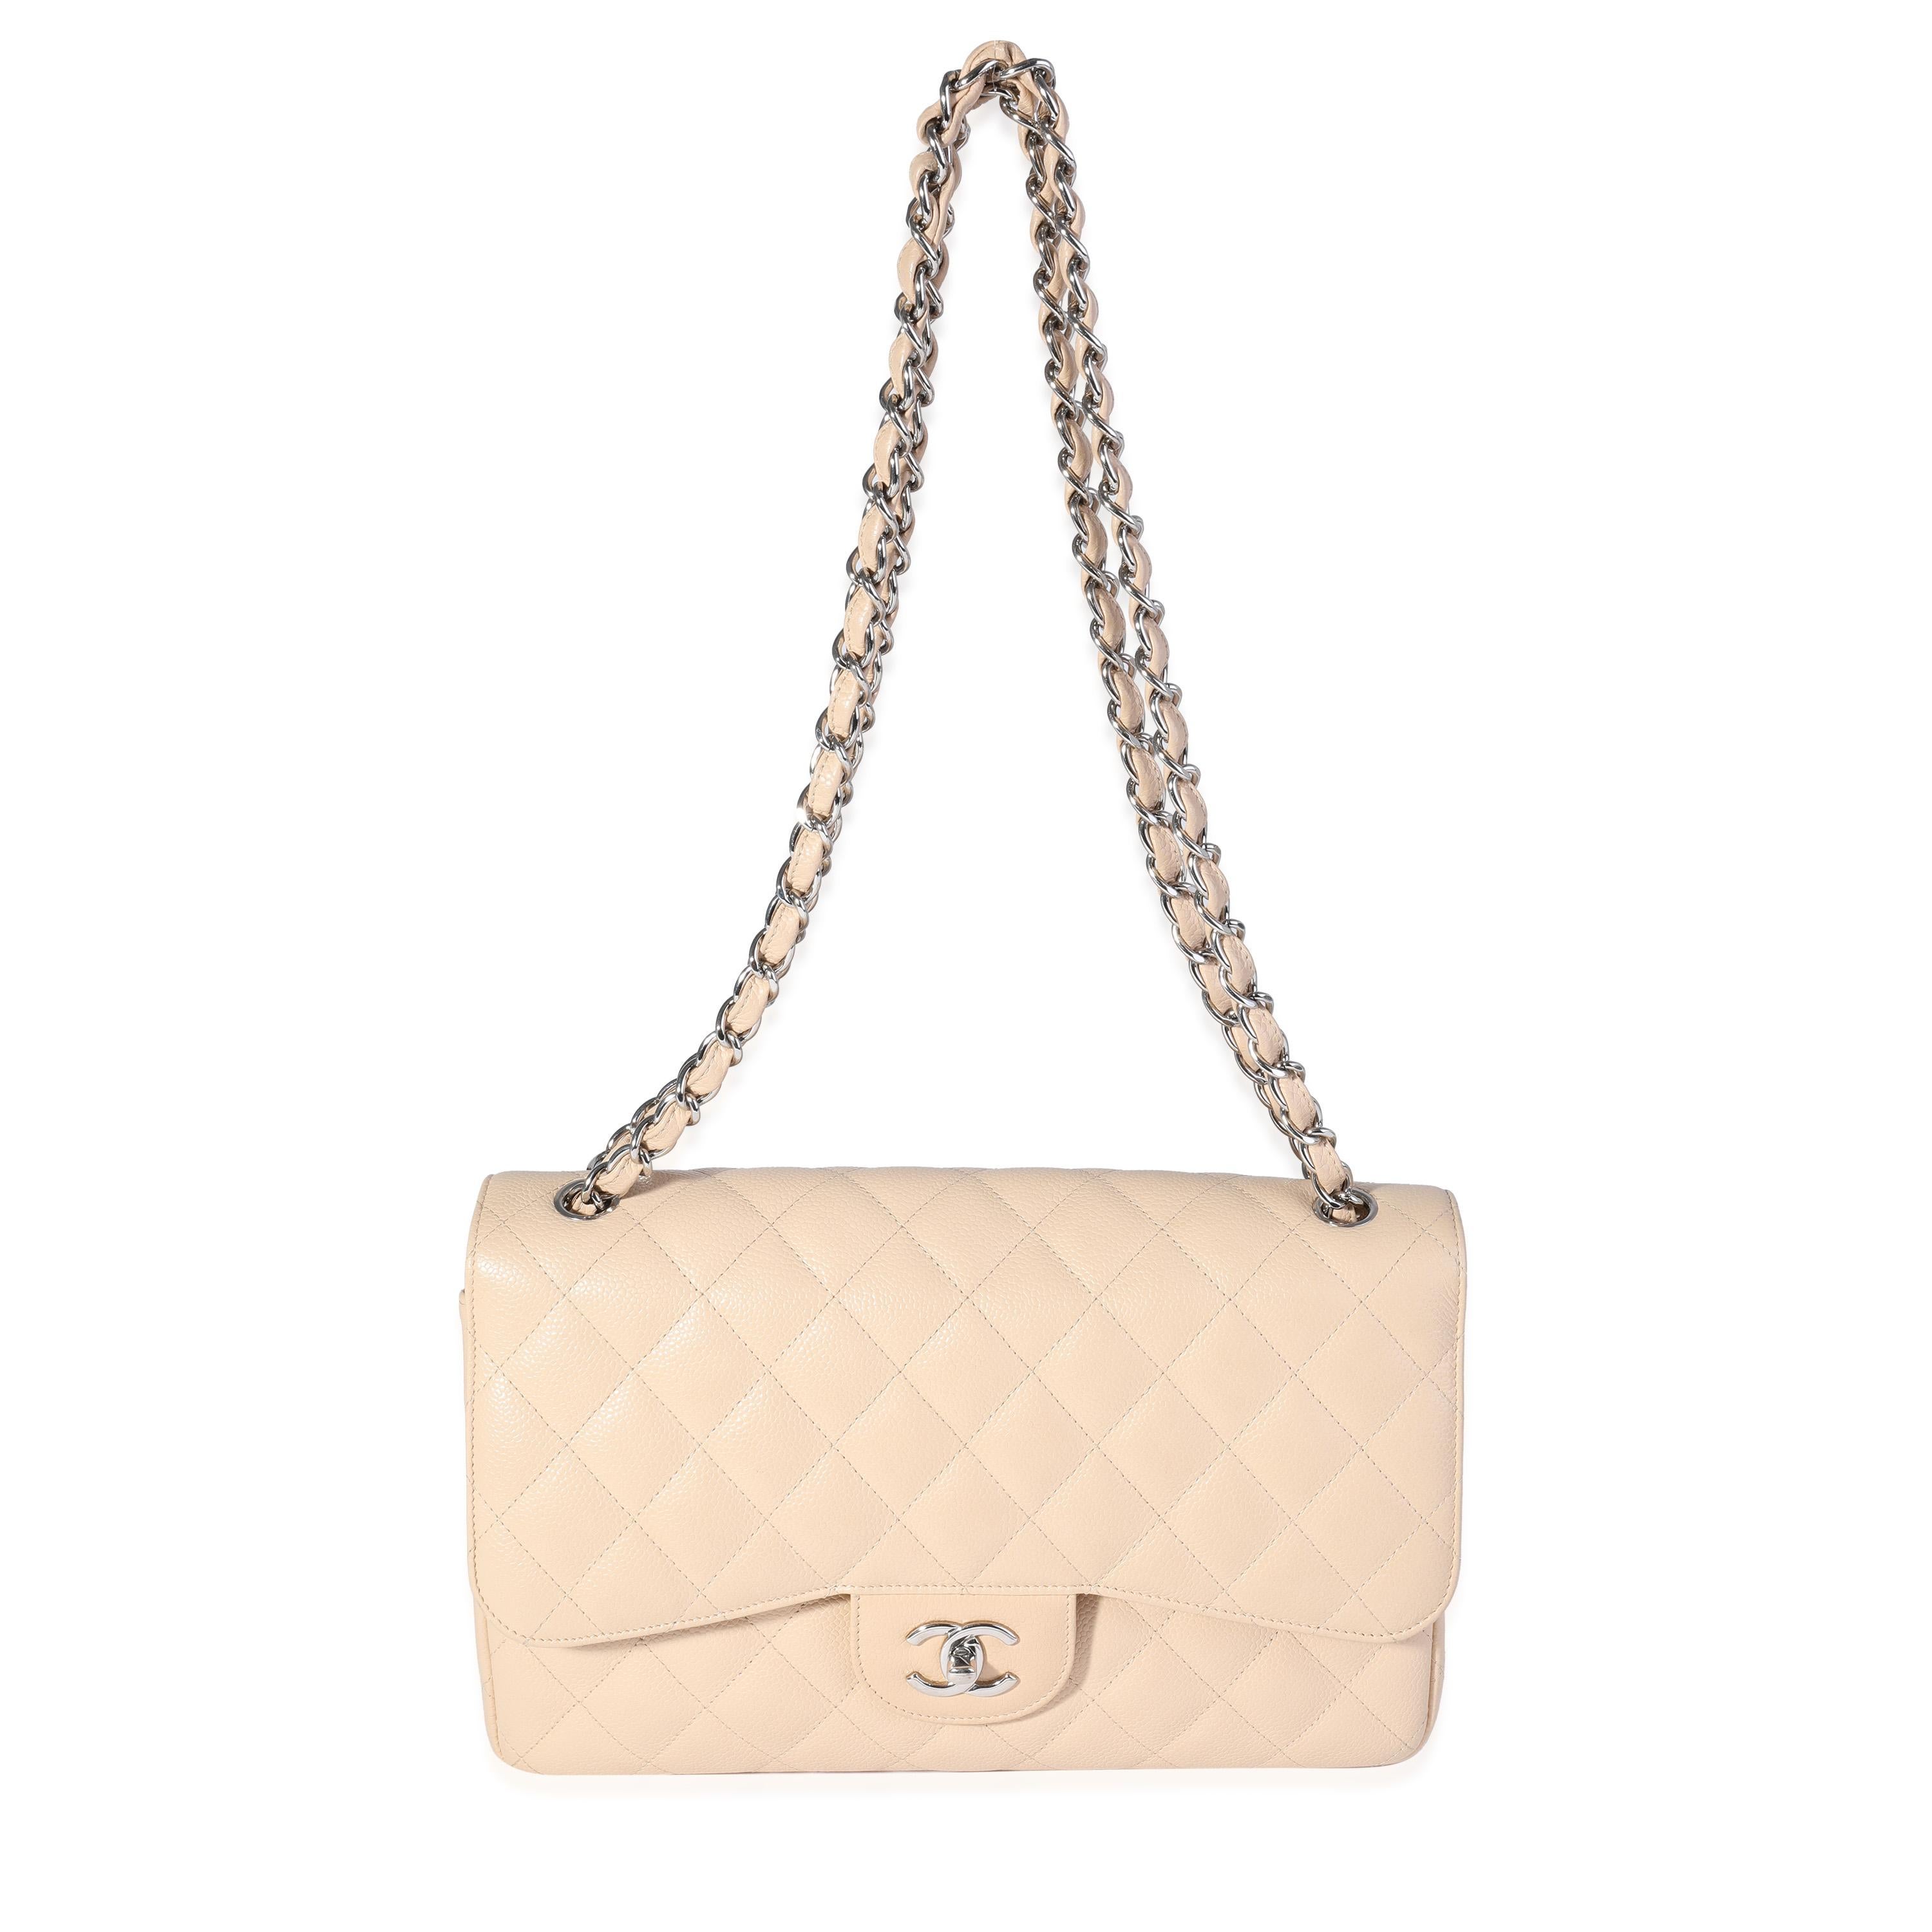 Listing Title: Chanel Beige Quilted Caviar Jumbo Classic Double Flap Bag
SKU: 120683
MSRP: 9500.00

Handbag Condition: Very Good
Condition Comments: Very Good Condition. Scuffing throughout. Scratching to hardware.
Brand: Chanel
Model: Classic